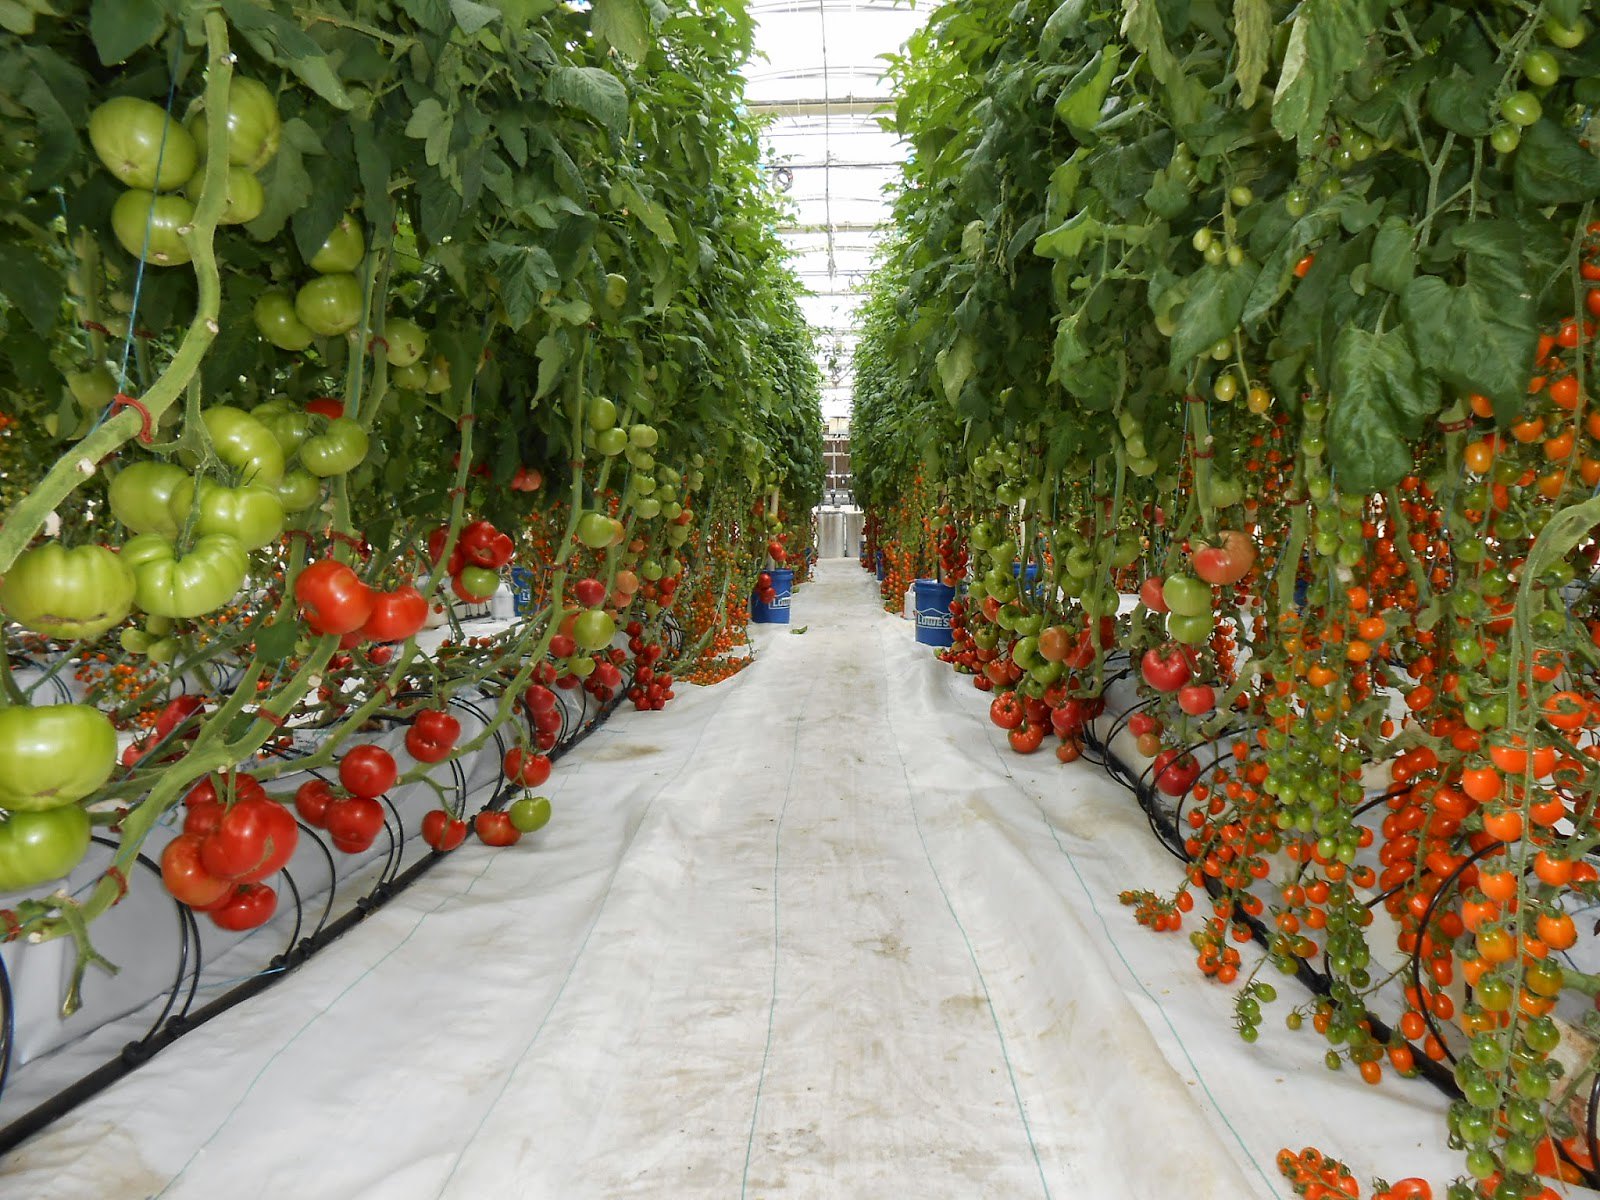 Tomato plants growing in controlled environment.